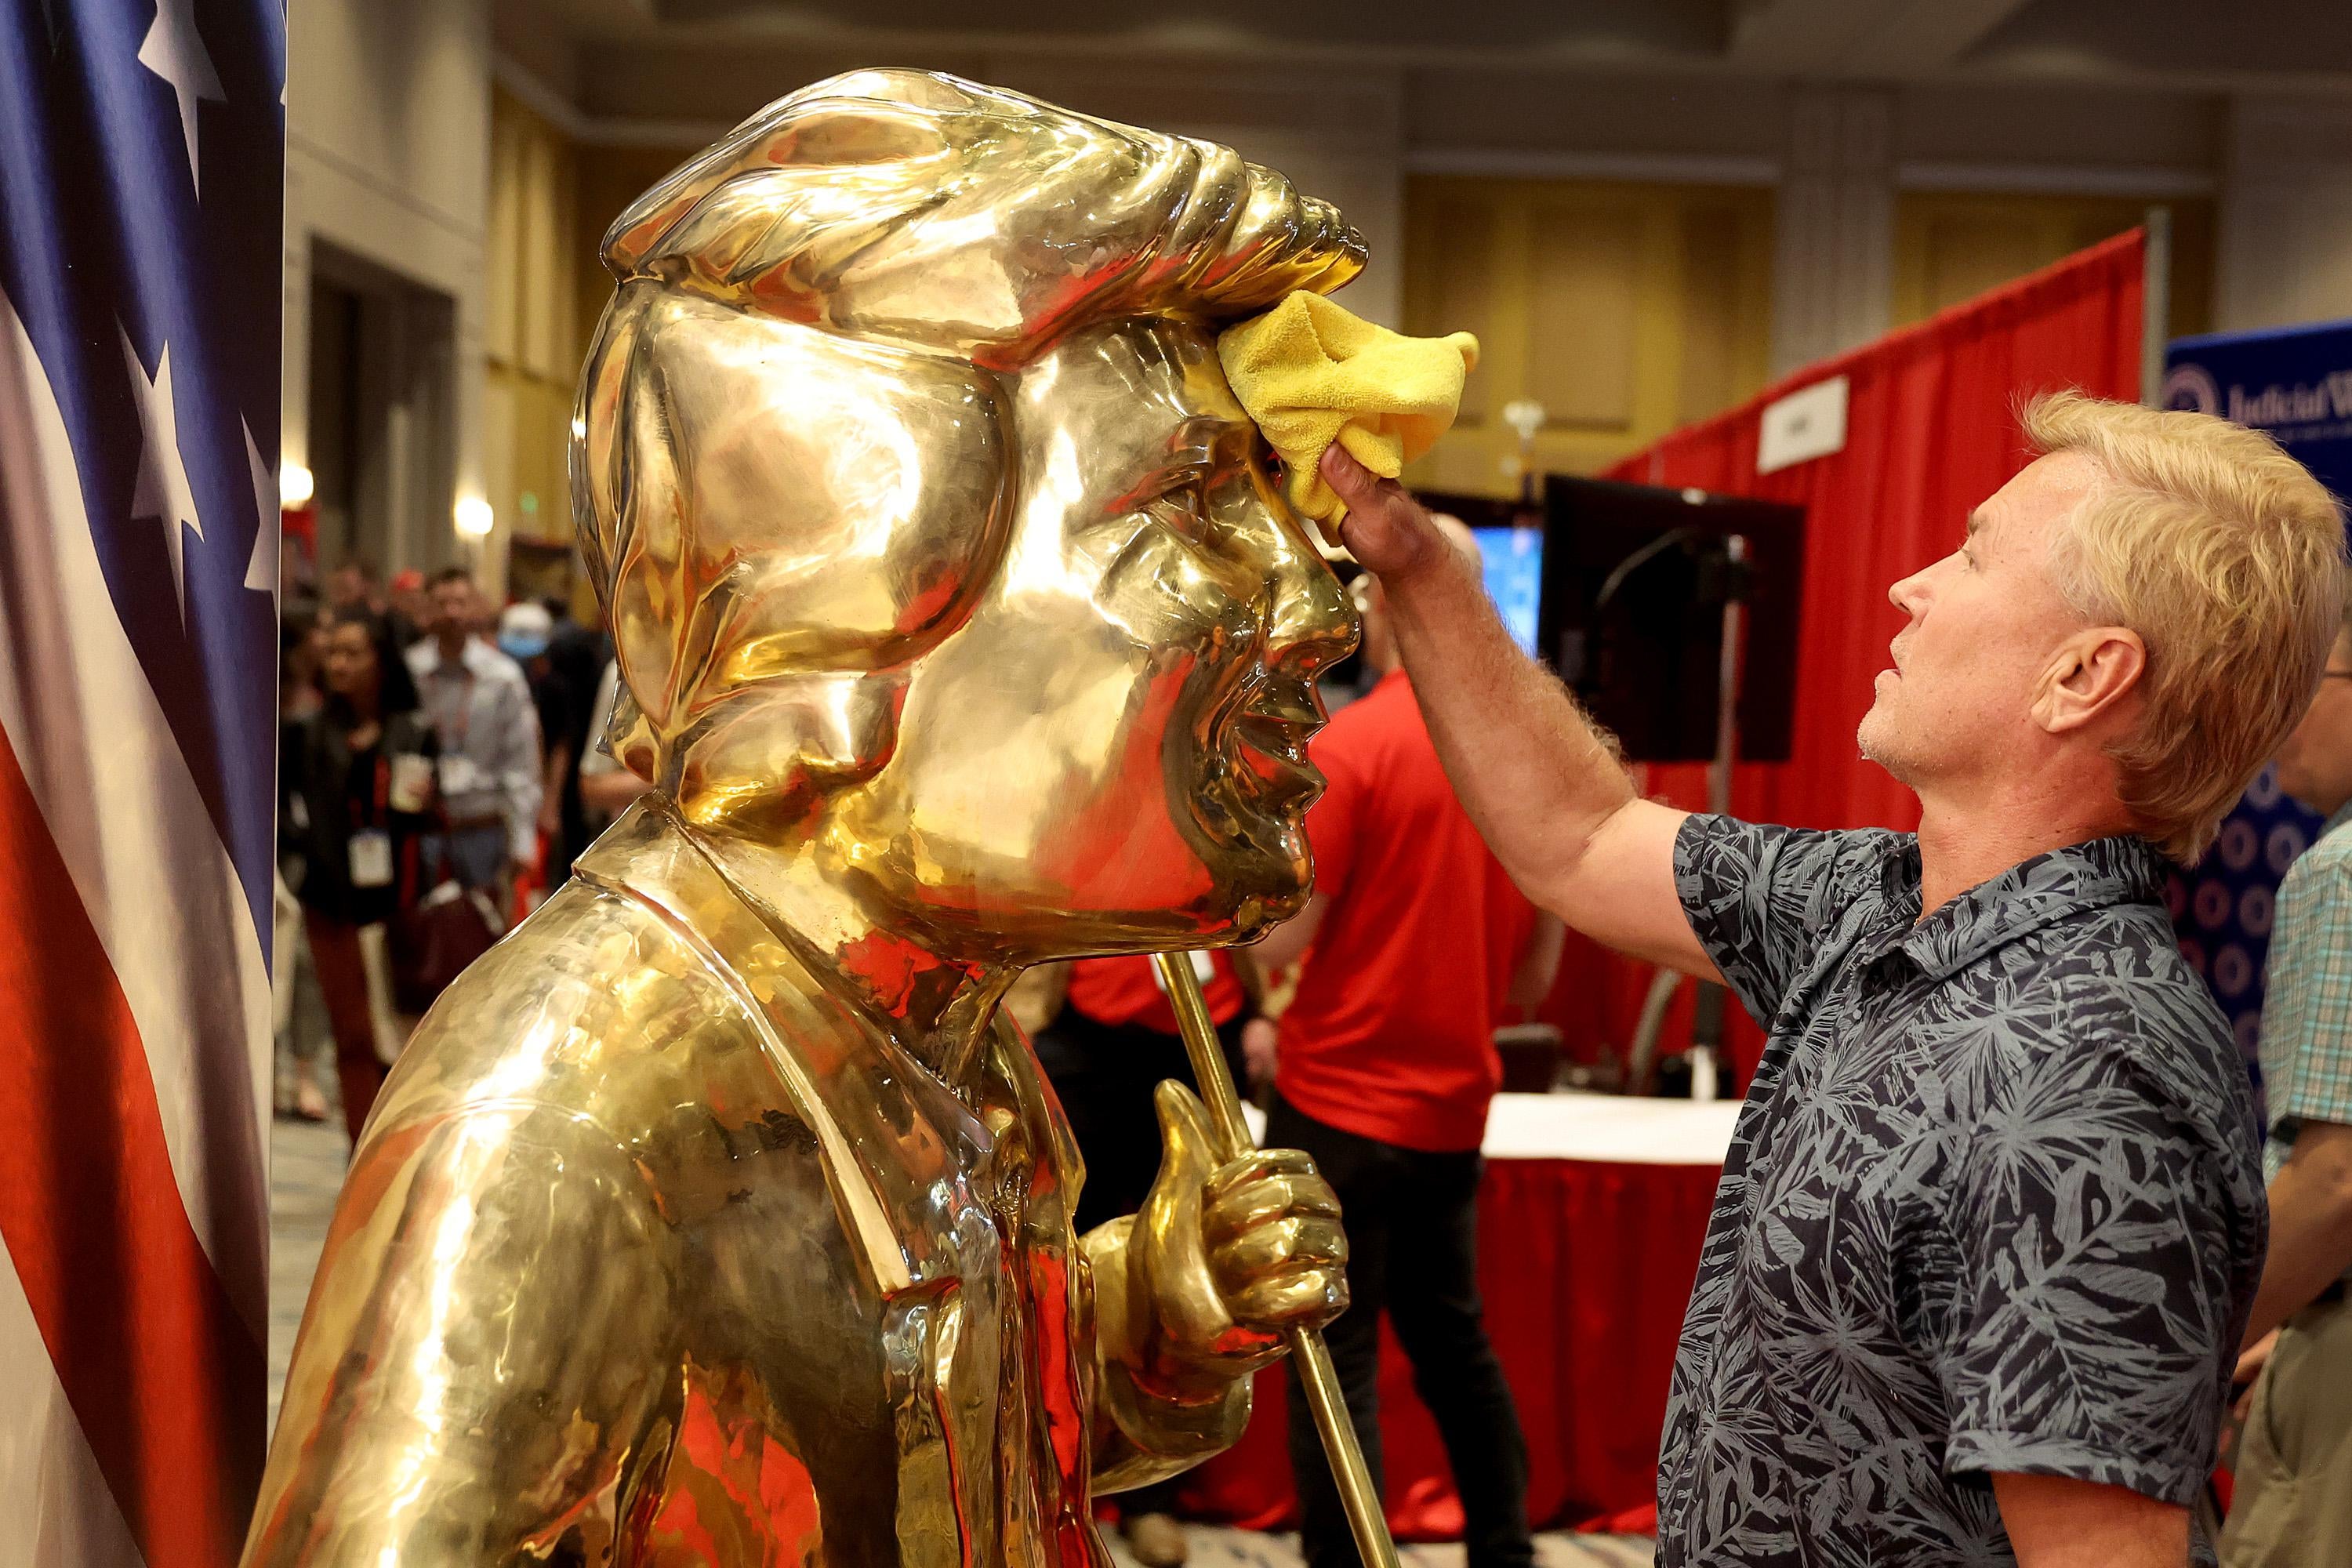 Artist Tom Zegan uses a cloth to wipe down the statue he created of former U.S. President Donald Trump at the Conservative Political Action Conference (CPAC) at The Rosen Shingle Creek on February 24, 2022 in Orlando, Florida. CPAC